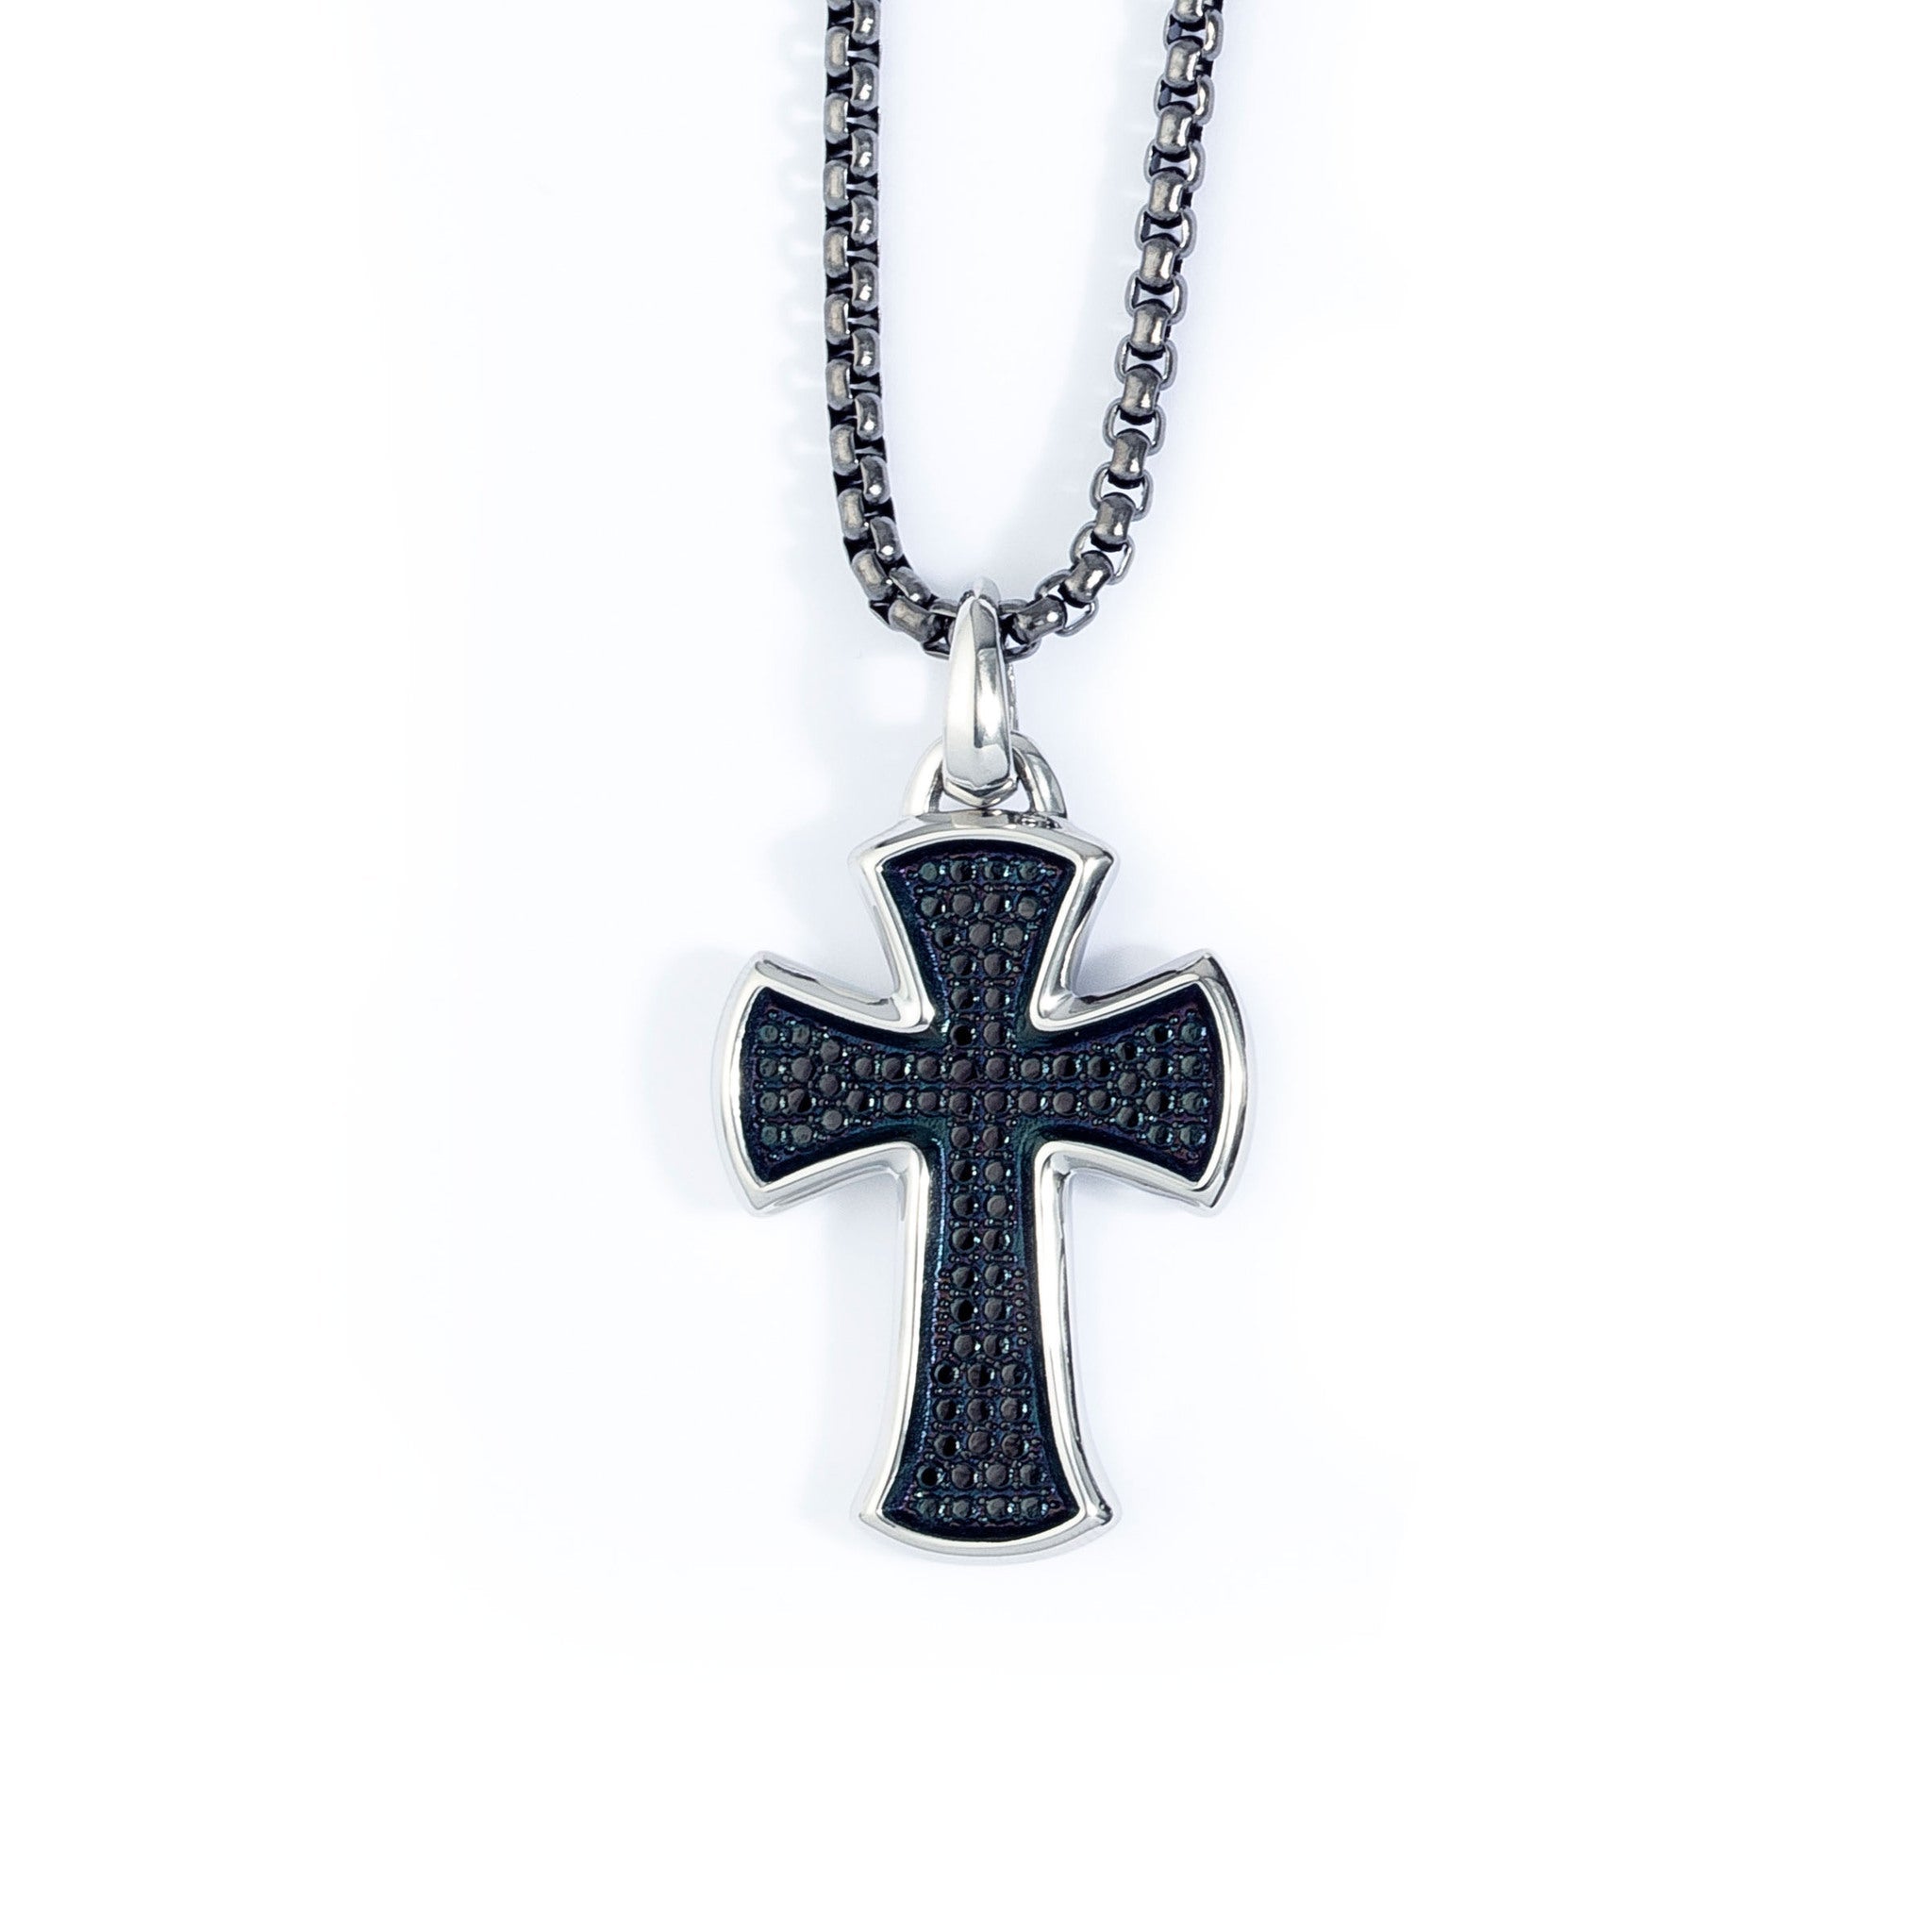 Frio Cross Pendant in Sterling Silver - Cross Collection by Hyo Silver